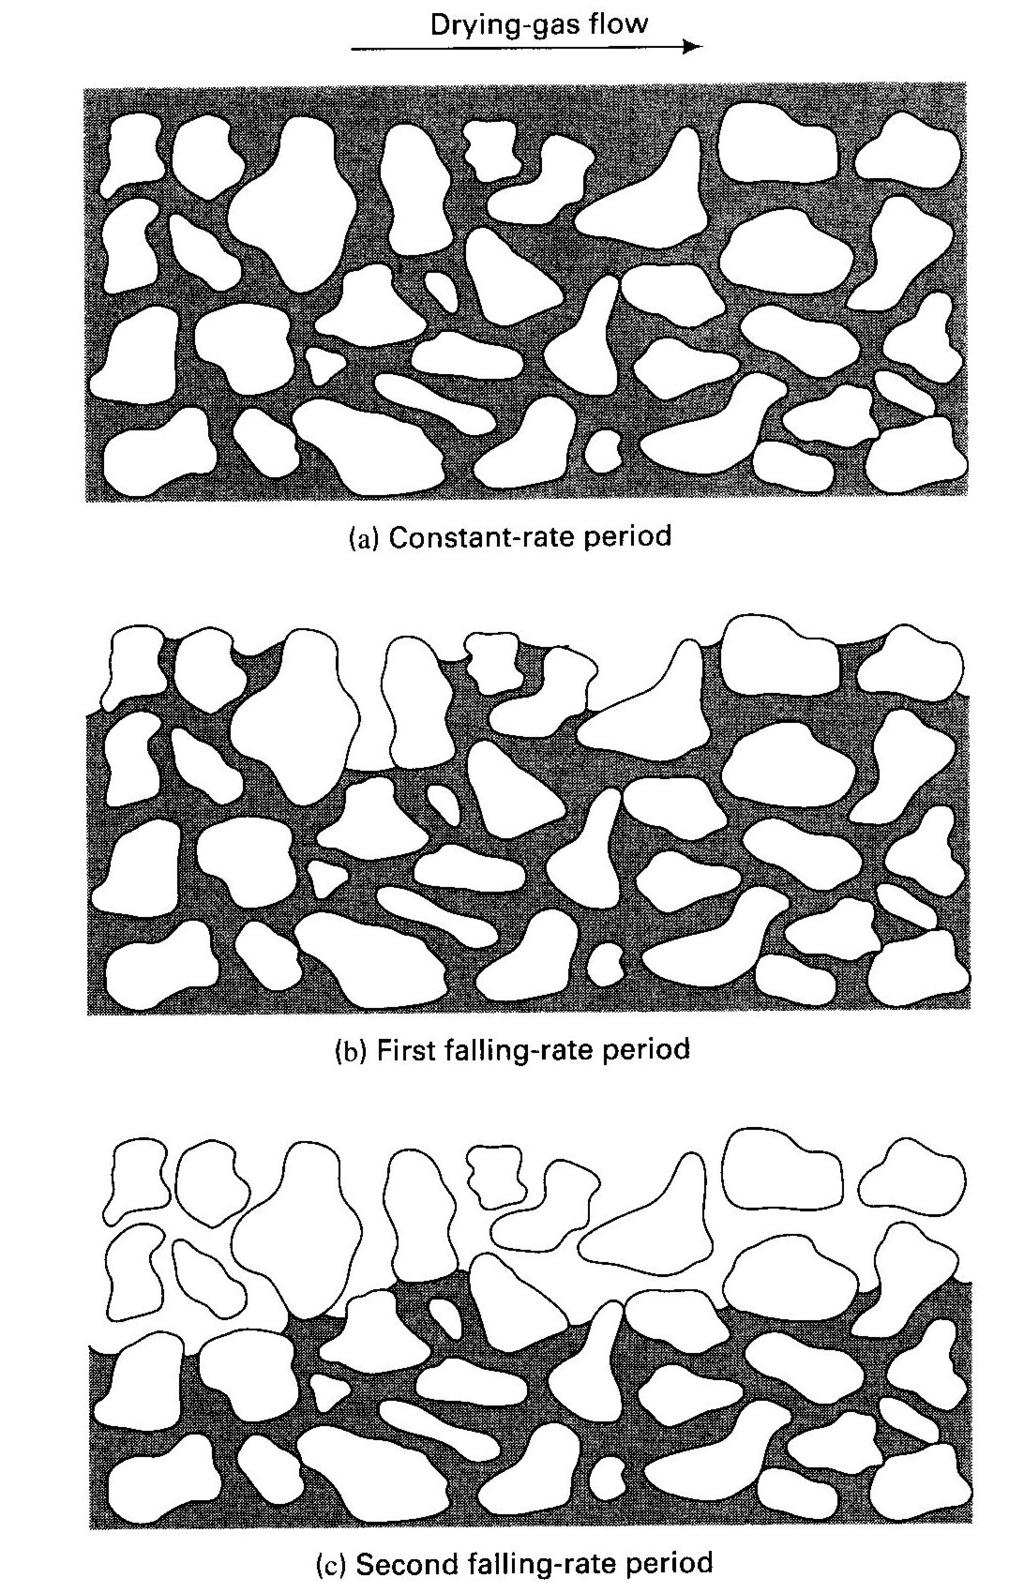 Figure 1: These three panels shows how the effect of liquid diffusion through the solid can greatly effect the rate of drying.